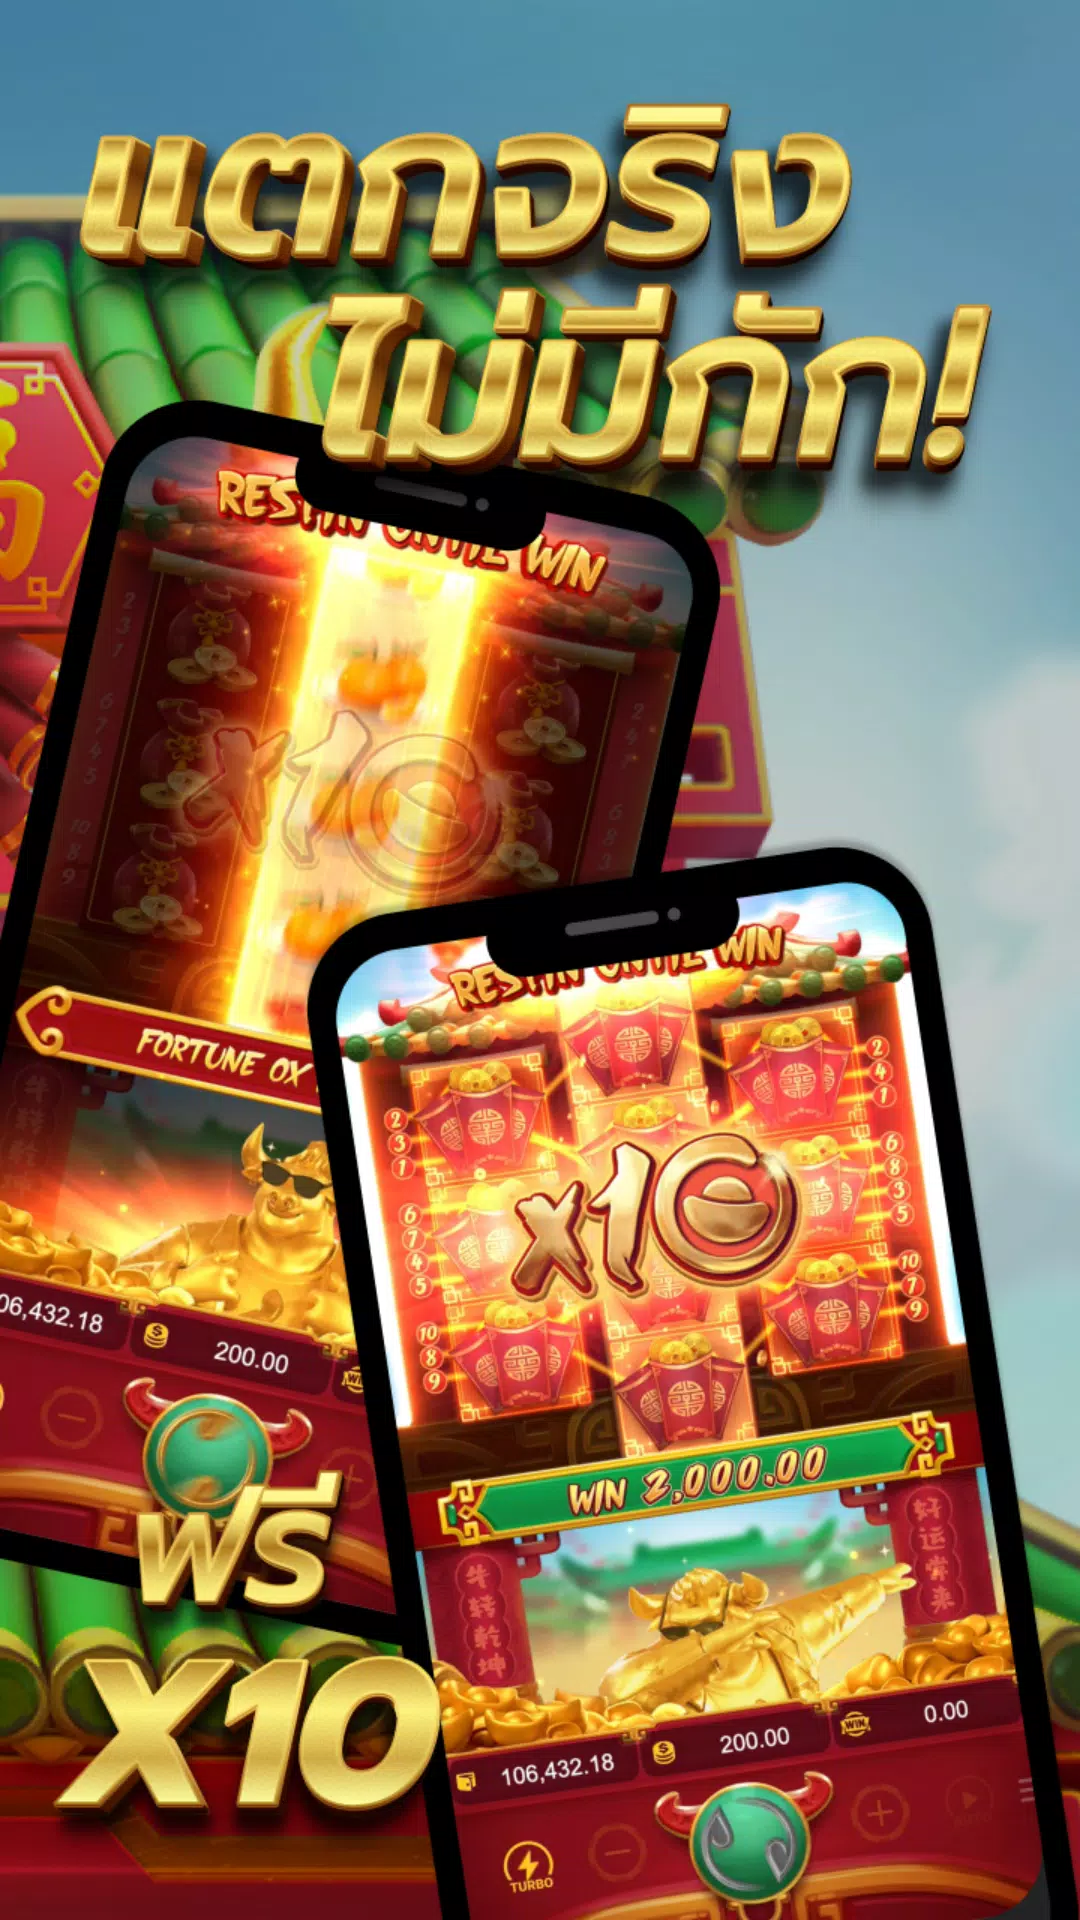 Fortune Ox: Incredible Fighter for iPhone - Free App Download